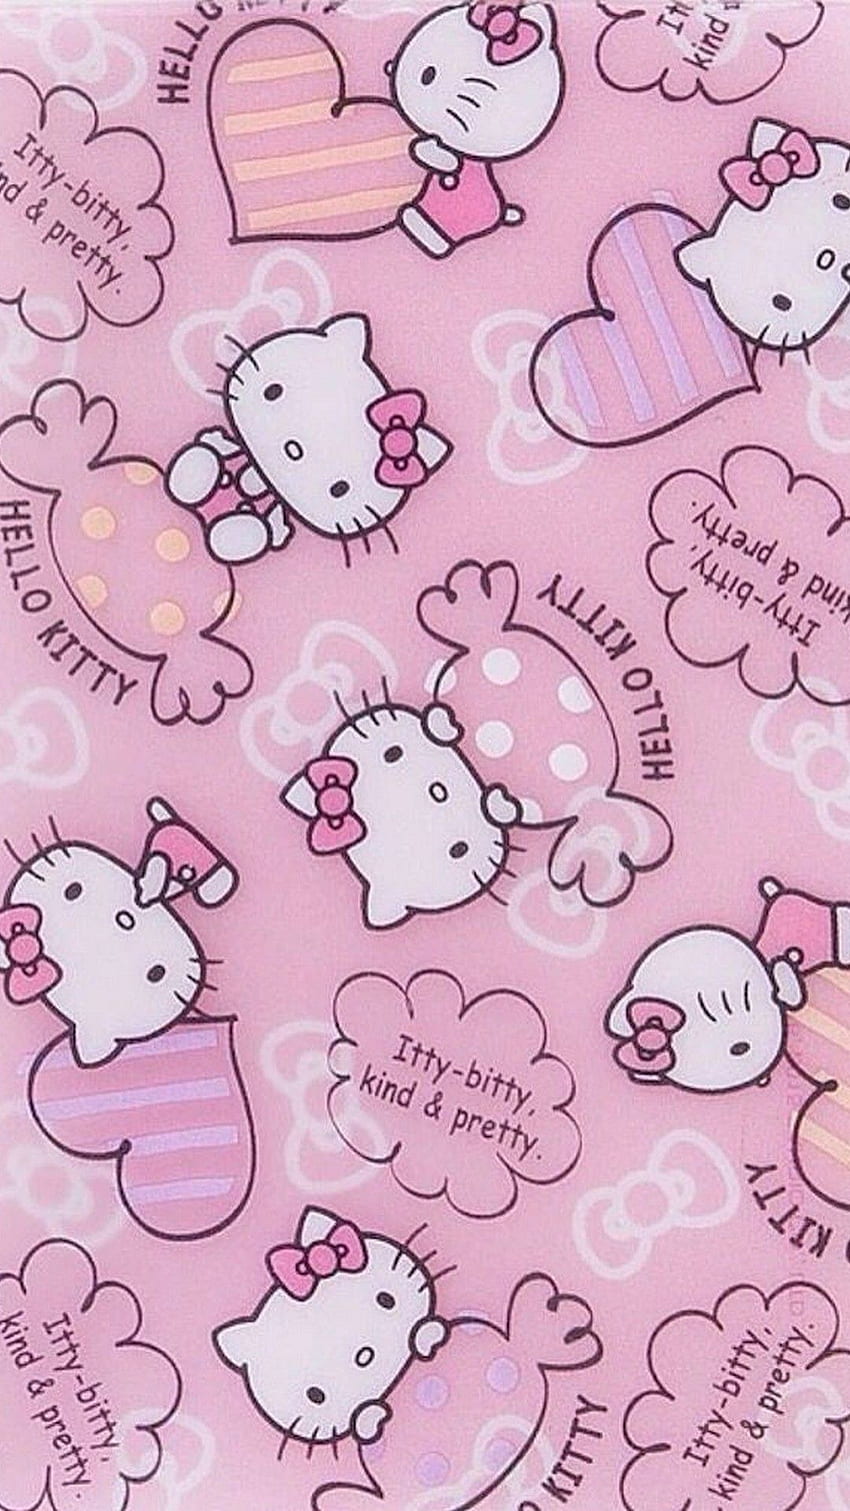 Details 61+ hello kitty phone wallpaper best - in.cdgdbentre